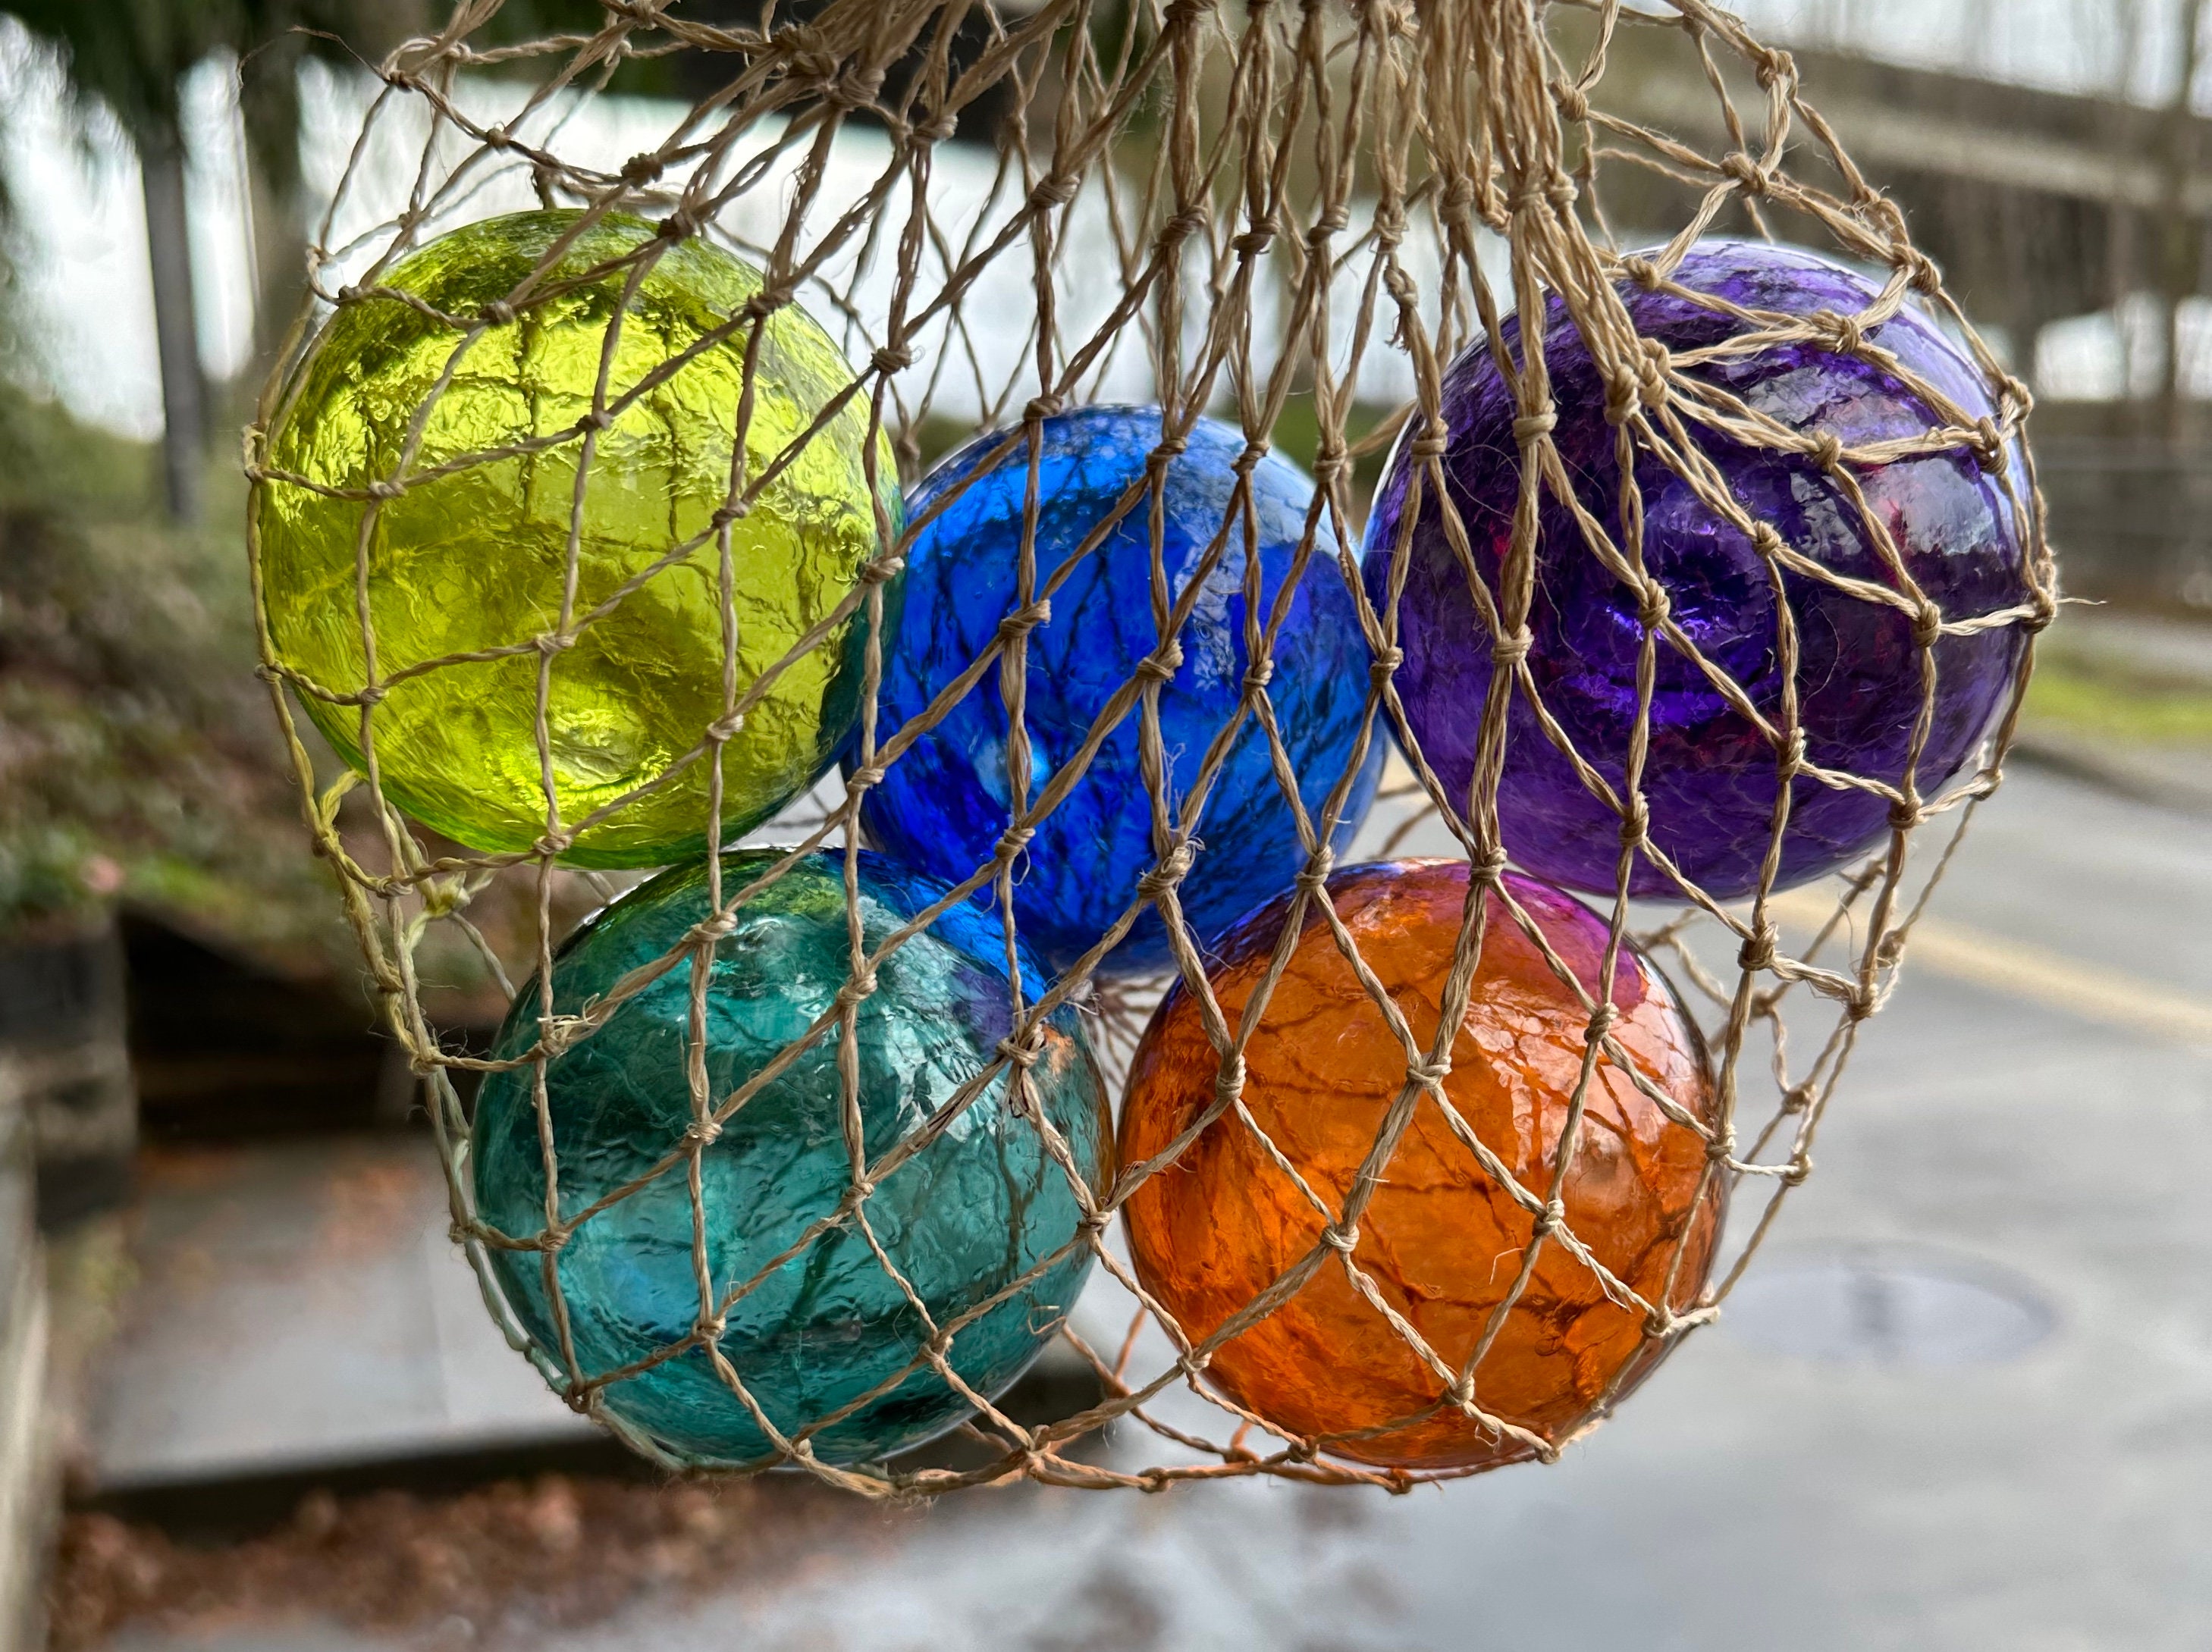 Glass Float, Old Fishing Nets Catch Closeup Stock Photo, Picture